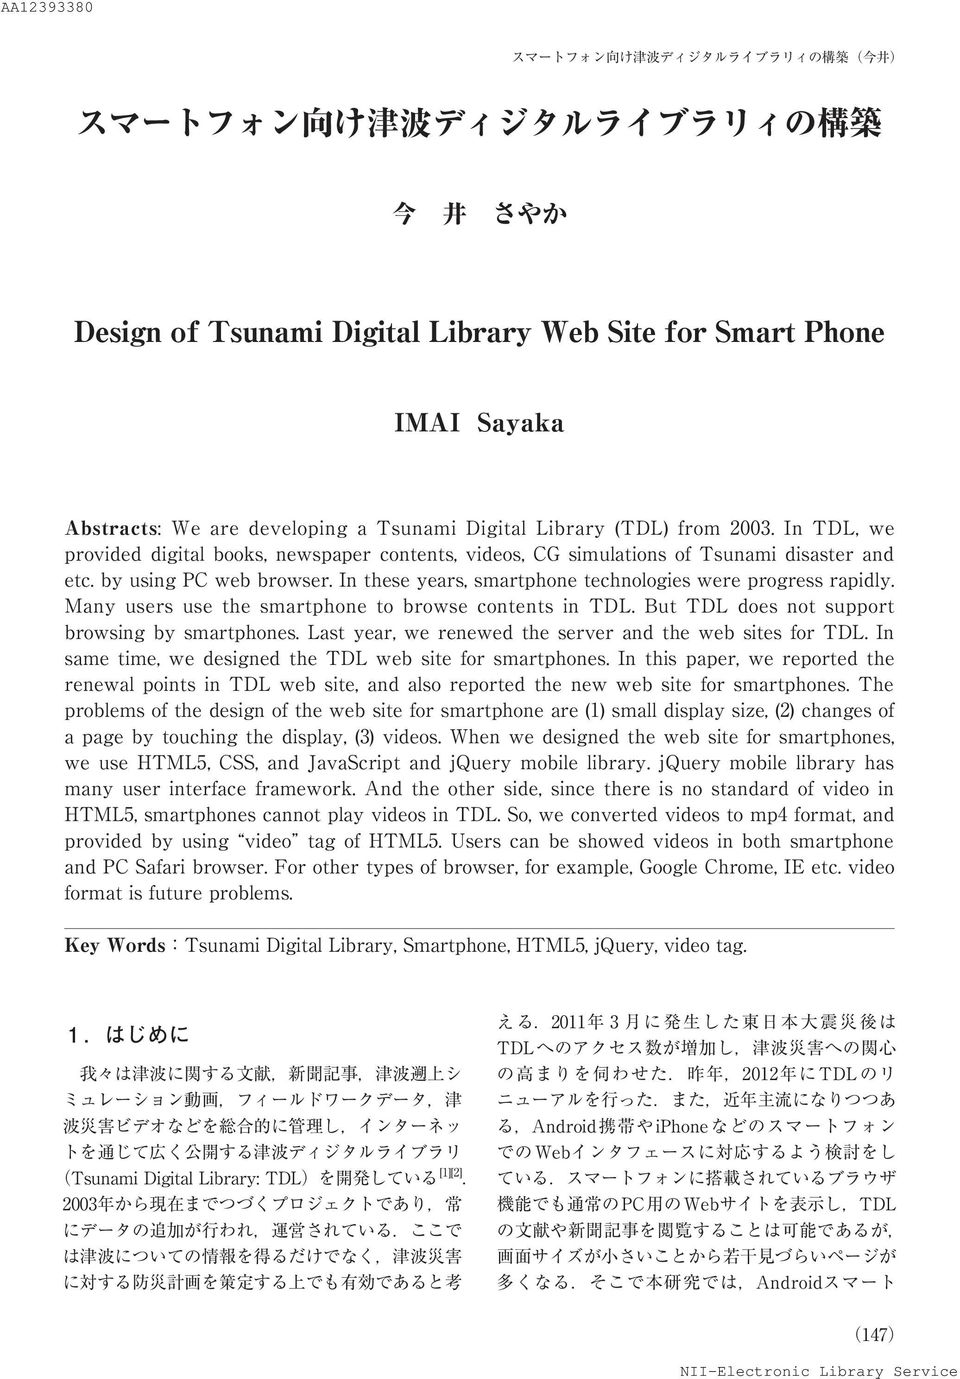 In these years, smartphone technologies were progress rapidly. Many users use the smartphone to browse contents in TDL. But TDL does not support browsing by smartphones.